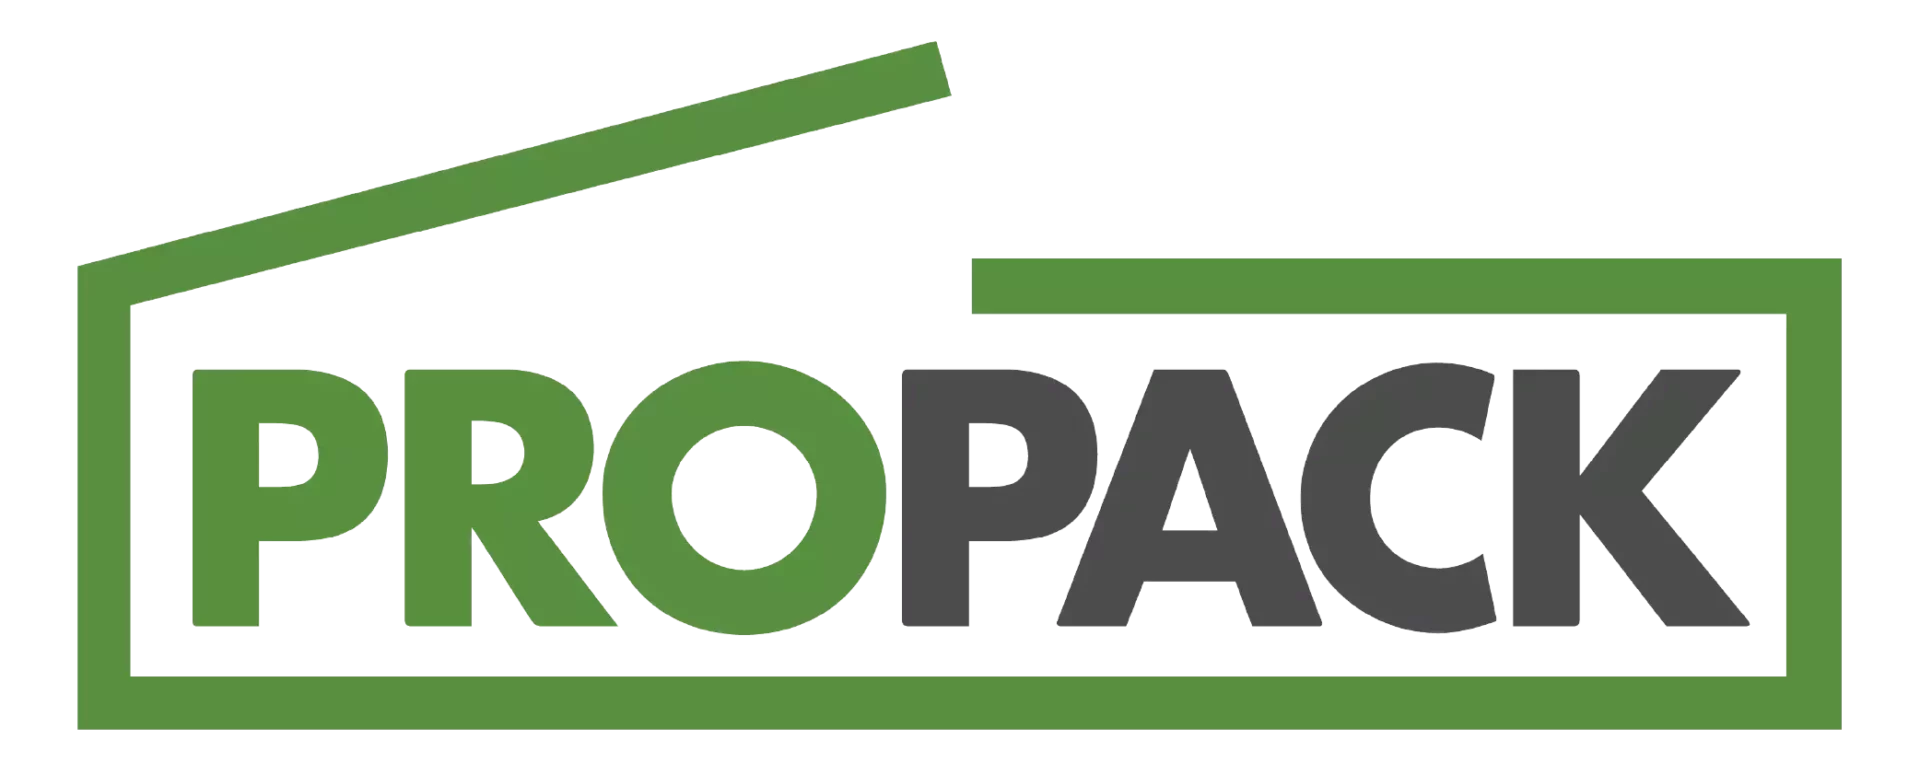 A logo for ProPack with green and grey lettering, an open shipping box surrounds the letters.